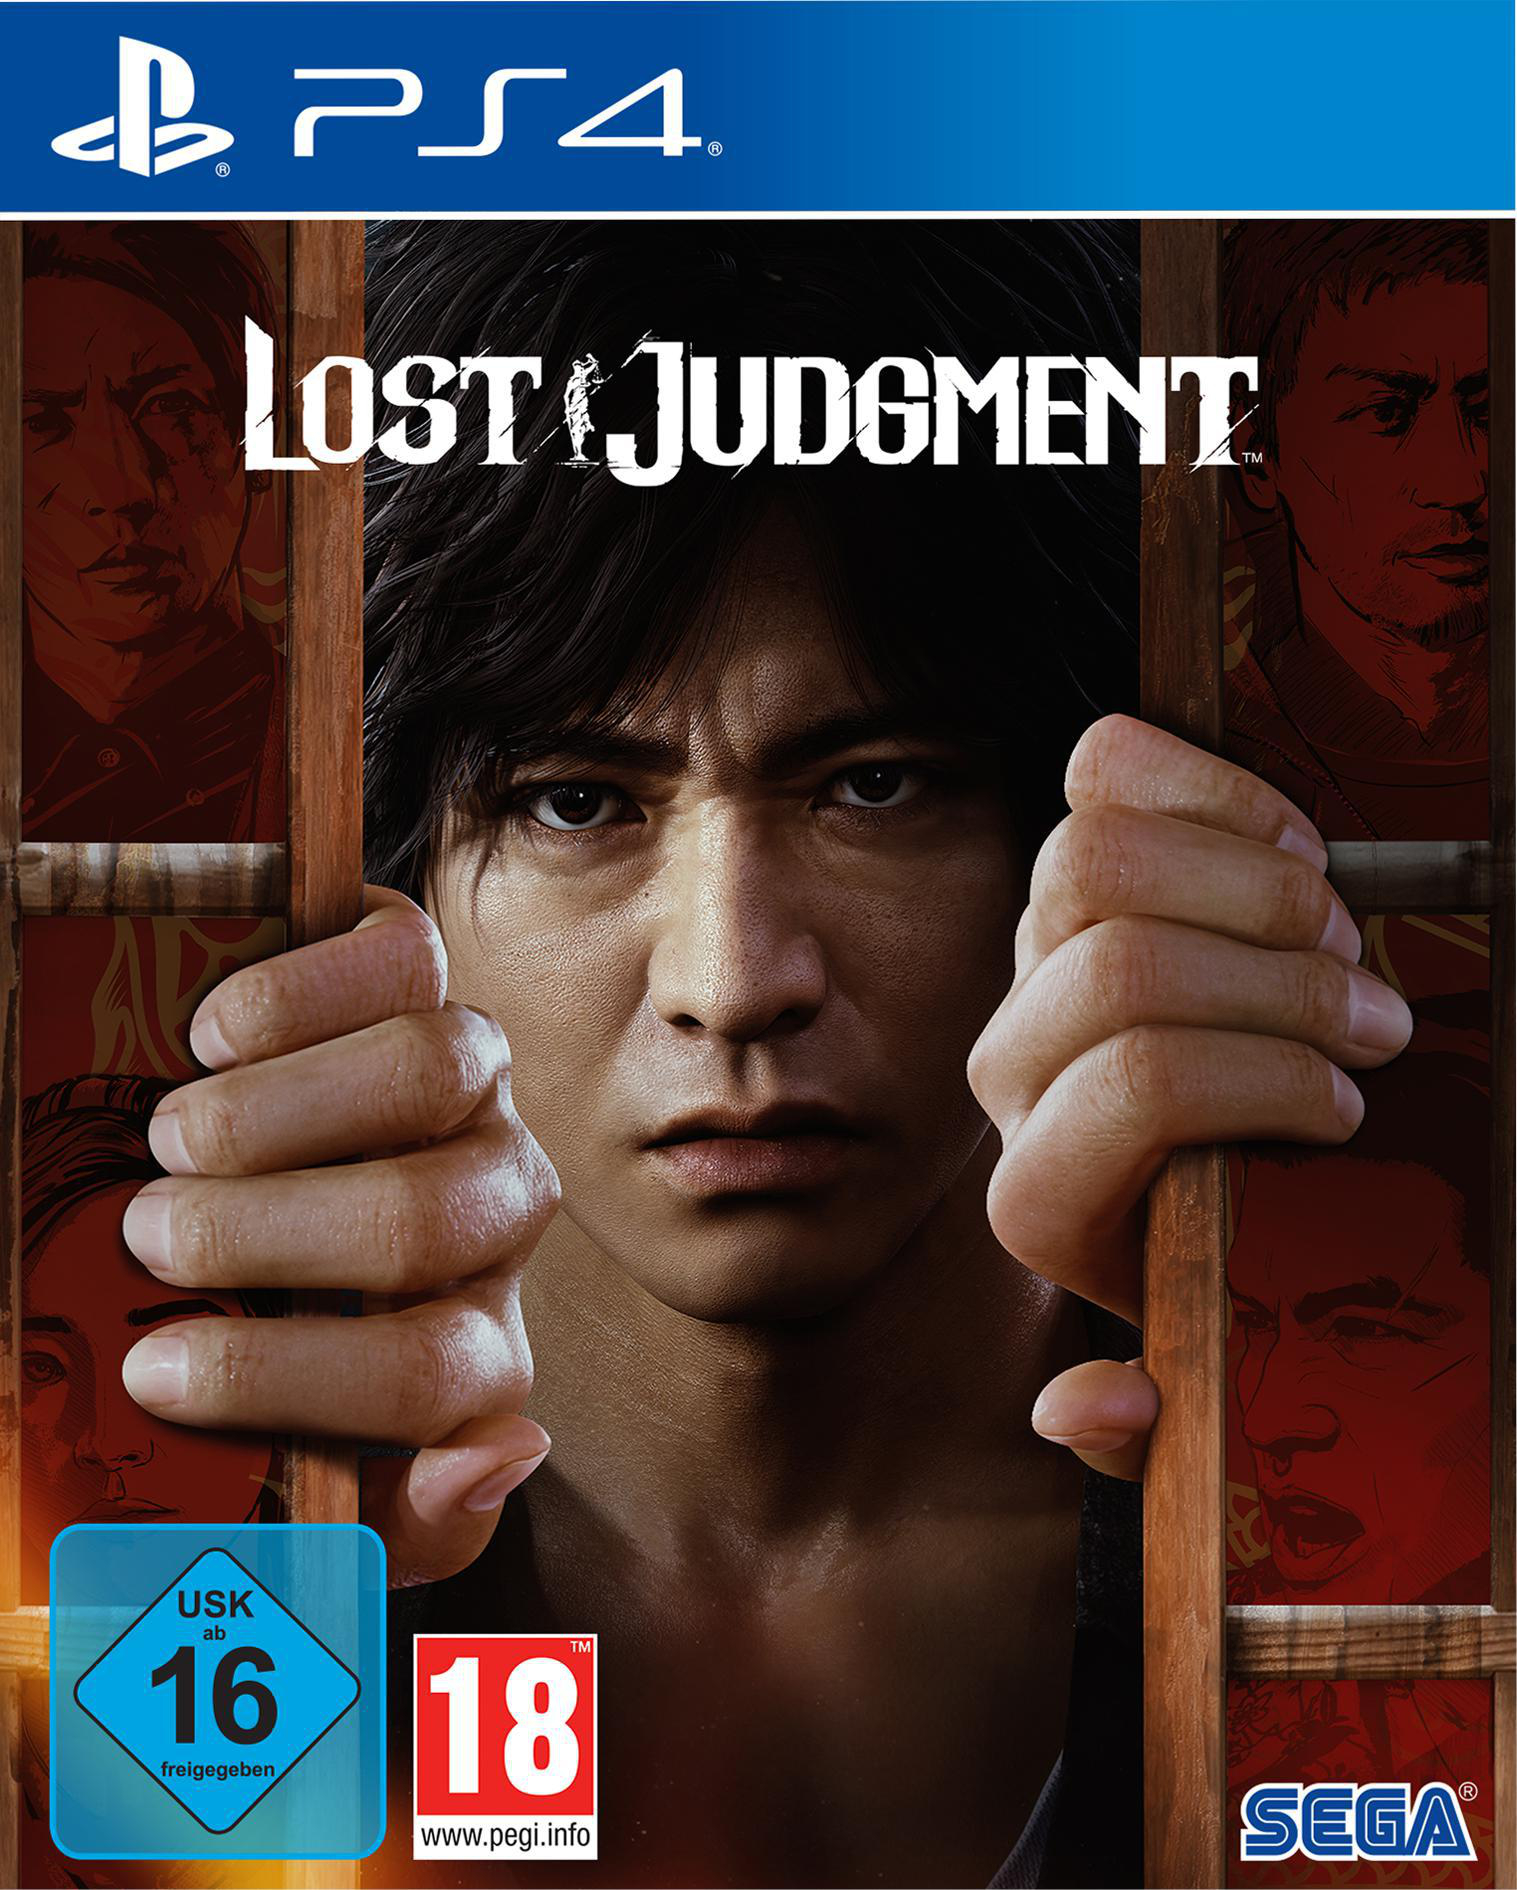 PS4 - JUDGMENT LOST [PlayStation 4]